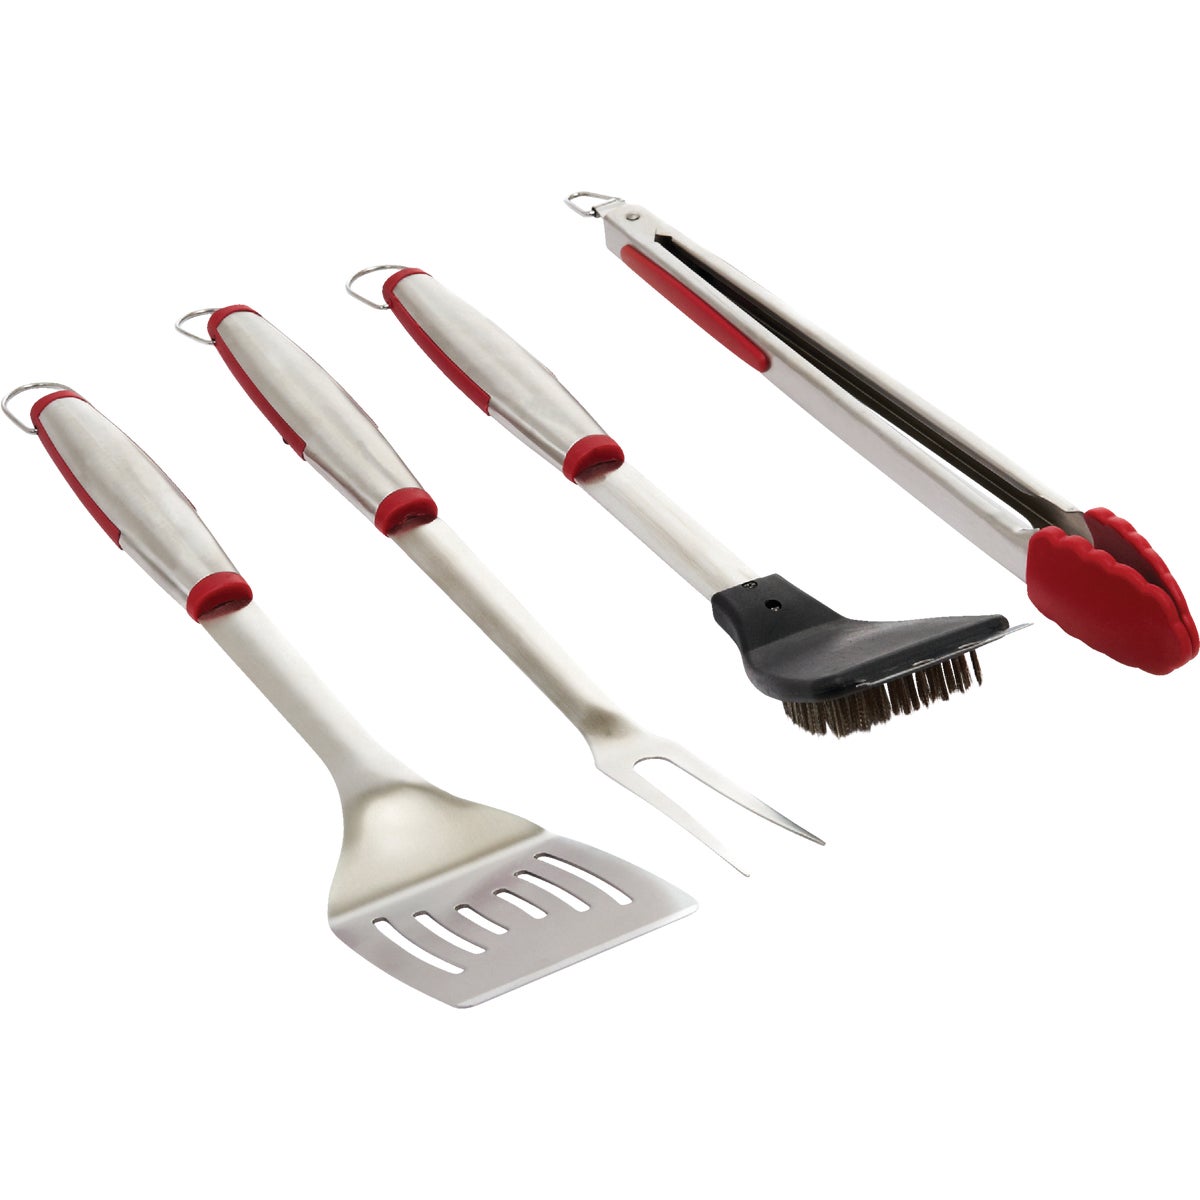 GrillPro Rubber Insert Handle Stainless Steel 4-Piece Barbeque Tool Set